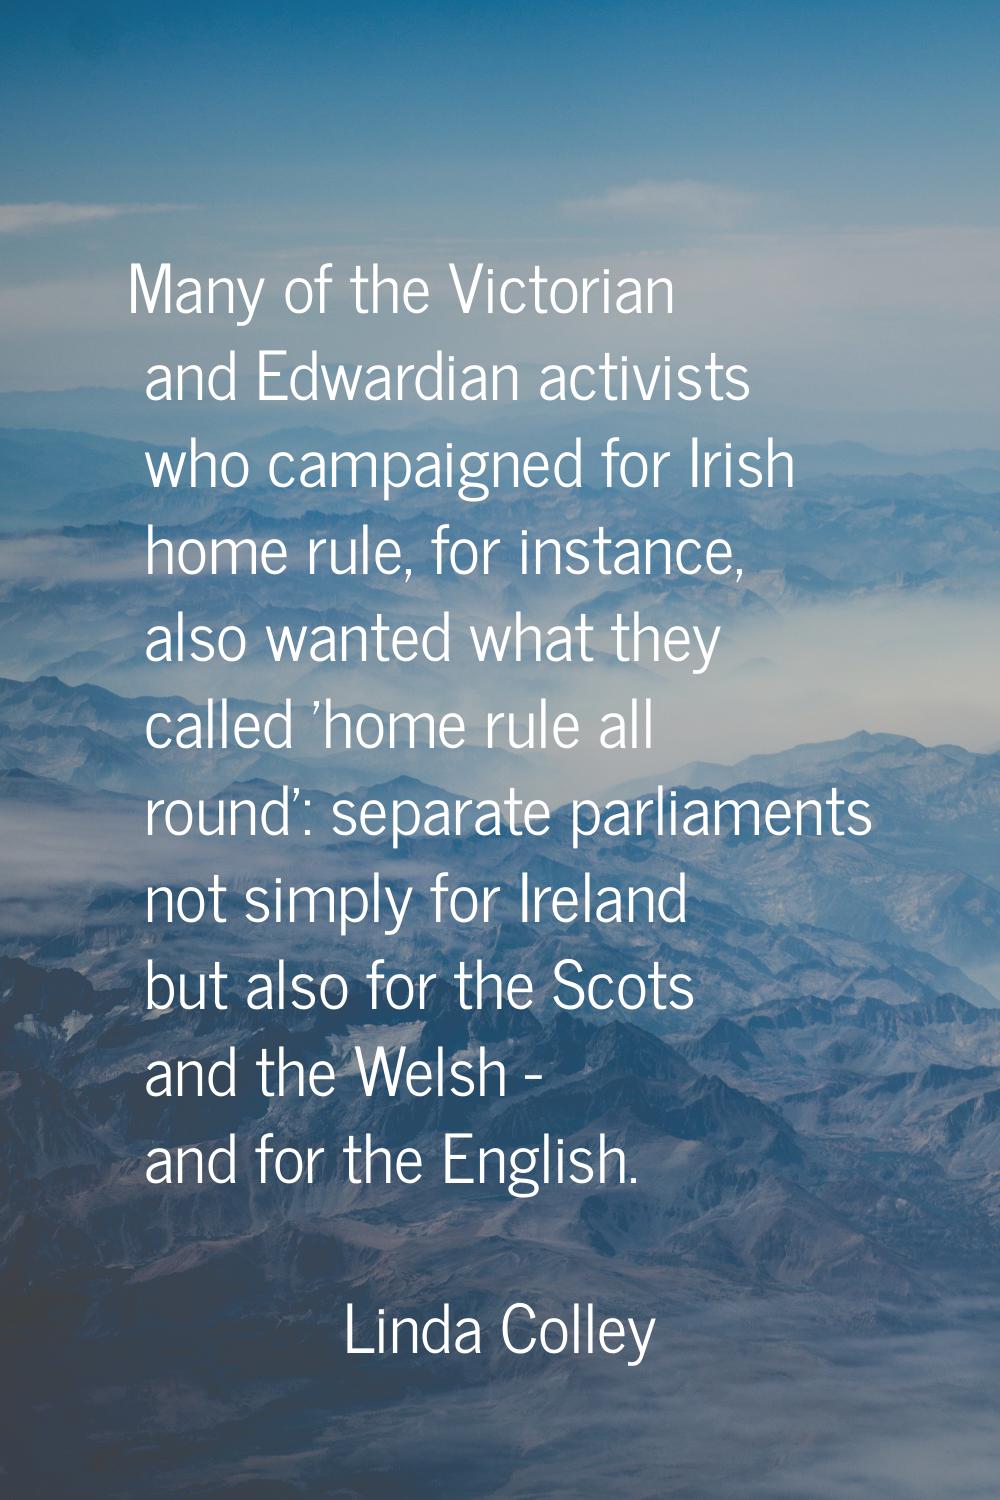 Many of the Victorian and Edwardian activists who campaigned for Irish home rule, for instance, als